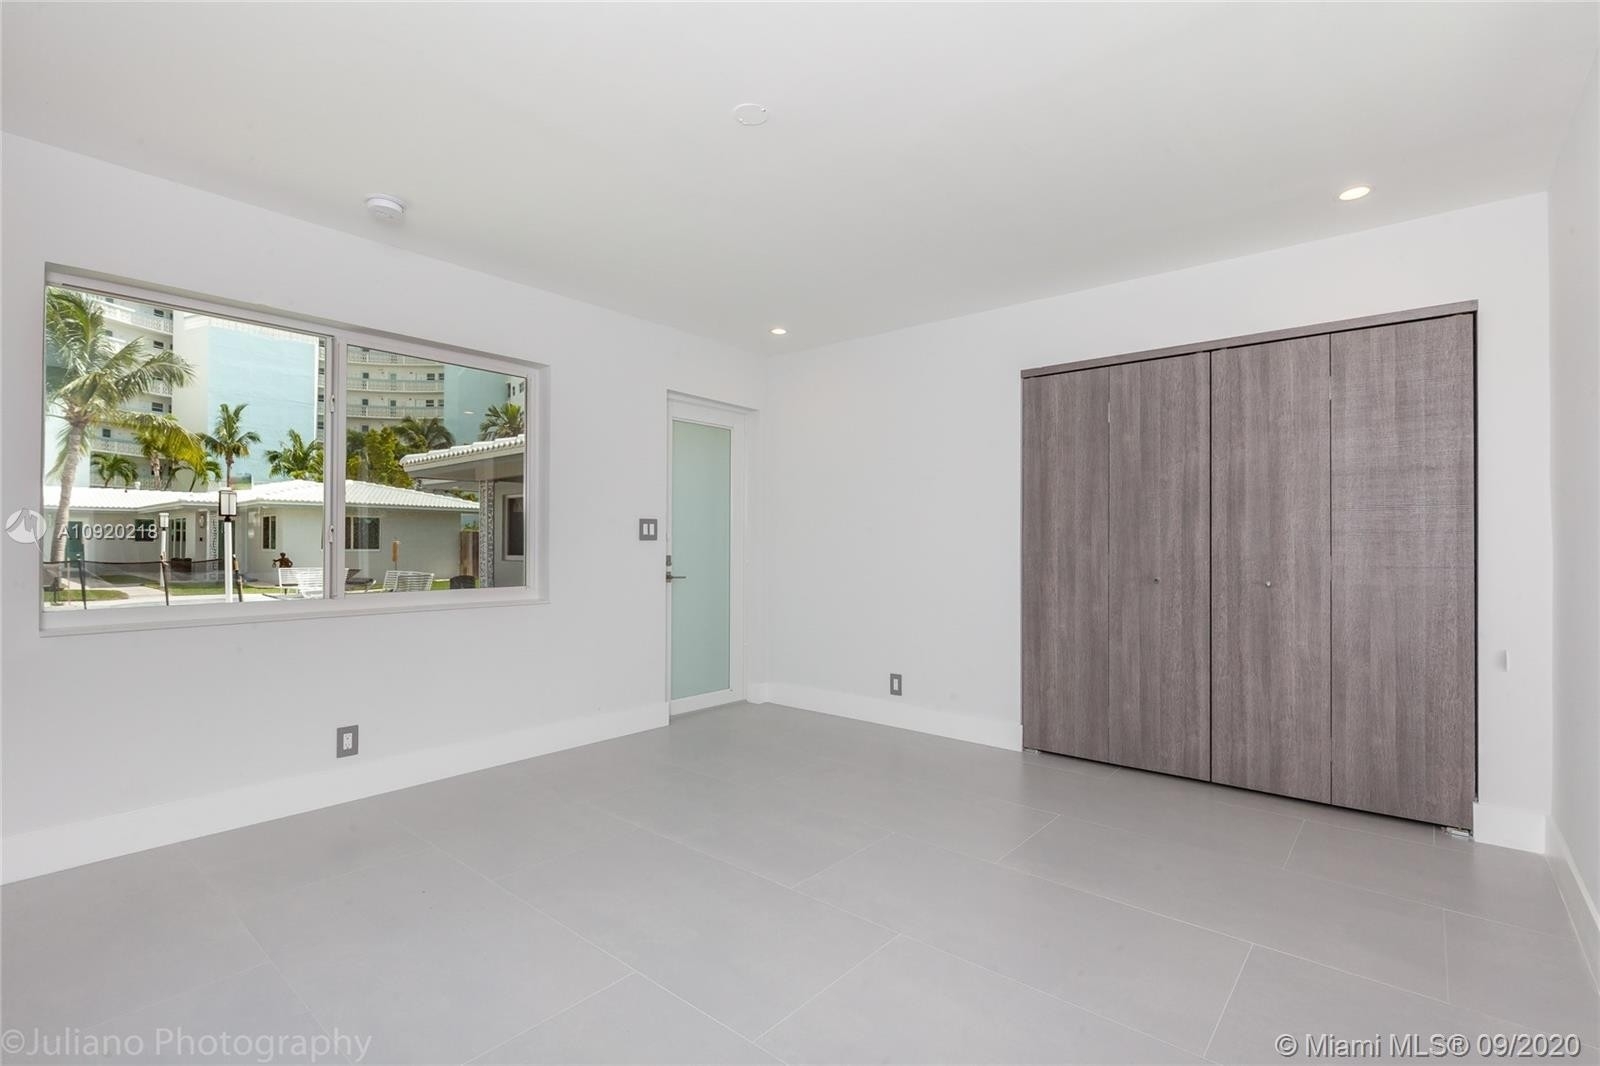 24. Rentals at 2706 NE 32nd Ave, 1 Fort Lauderdale